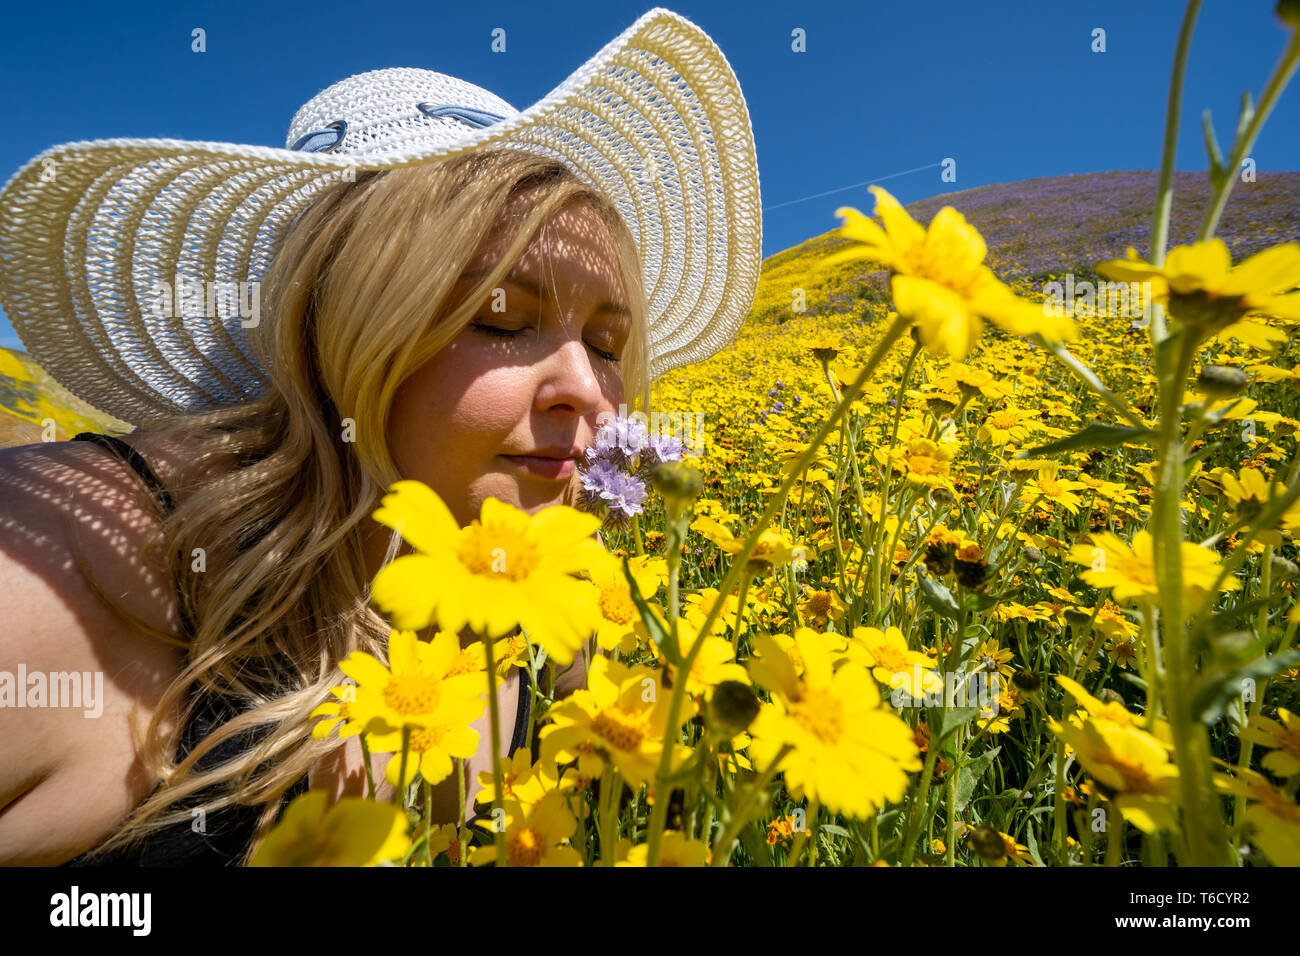 Blonde woman wearing straw white hat smelling a field of yellow wildflowers. Concept for springtime allergy relief Stock Photo